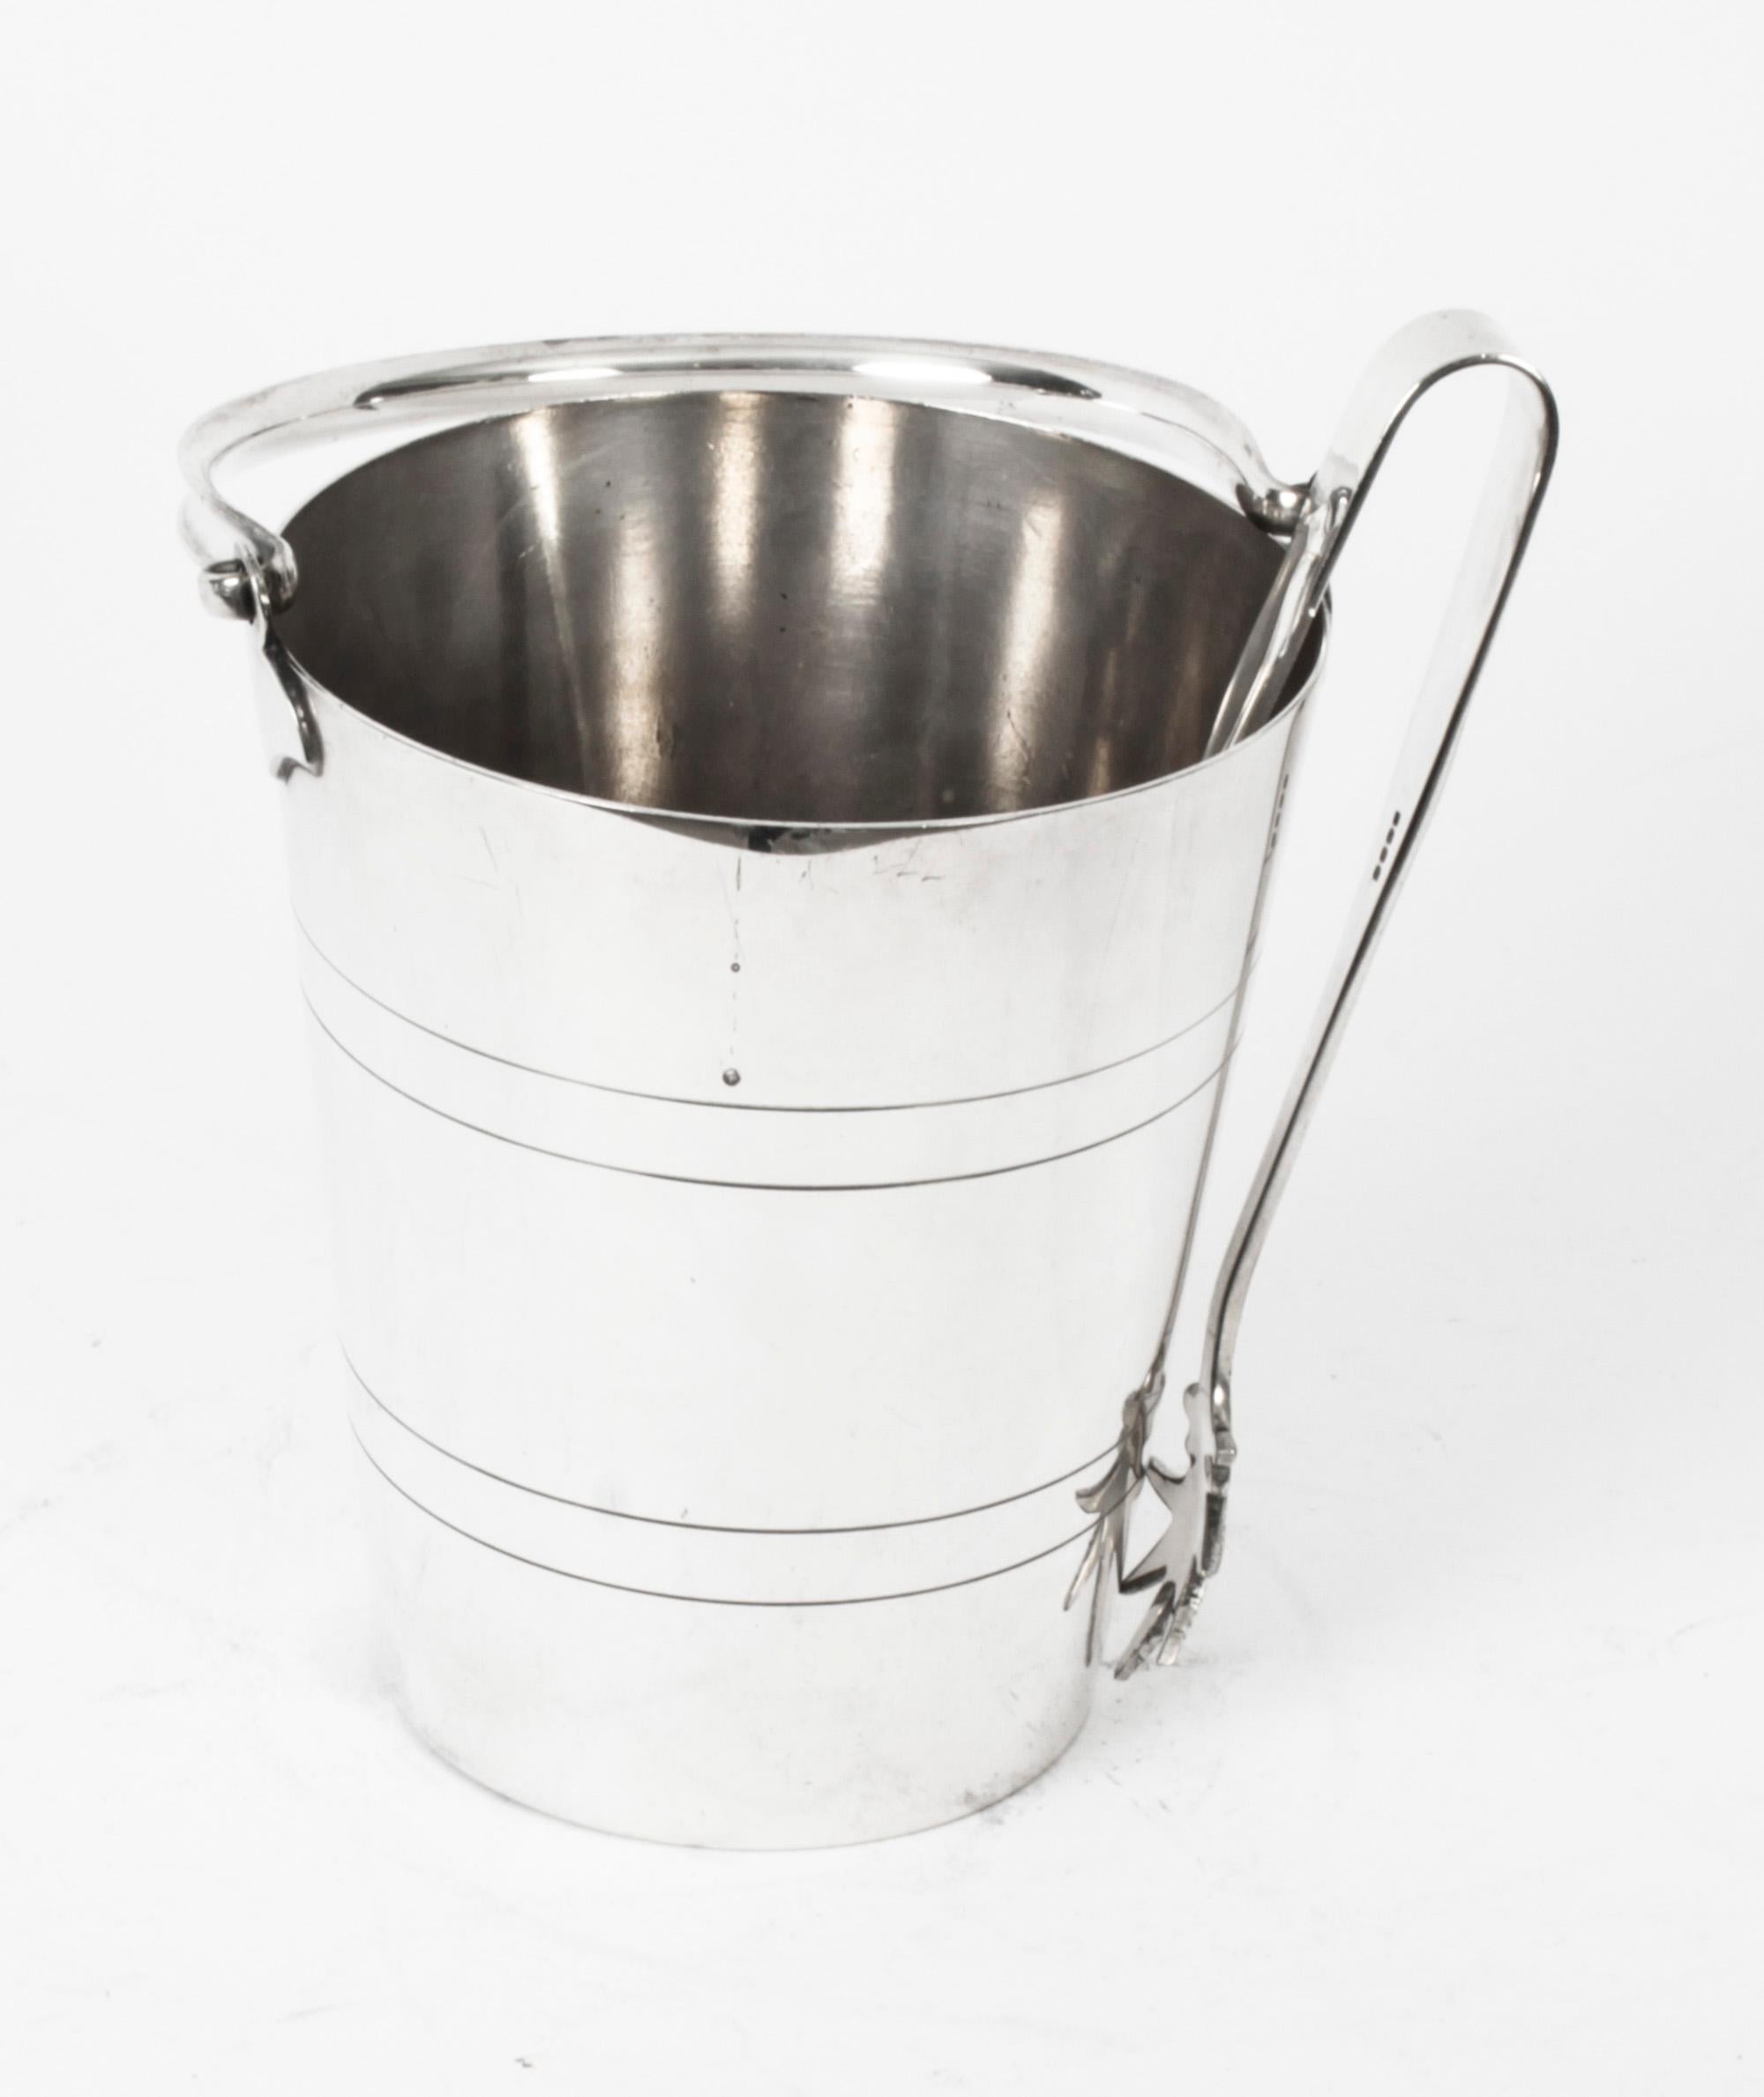 English Antique Art Deco Silver Plate Ice Bucket Cooler, 1920s